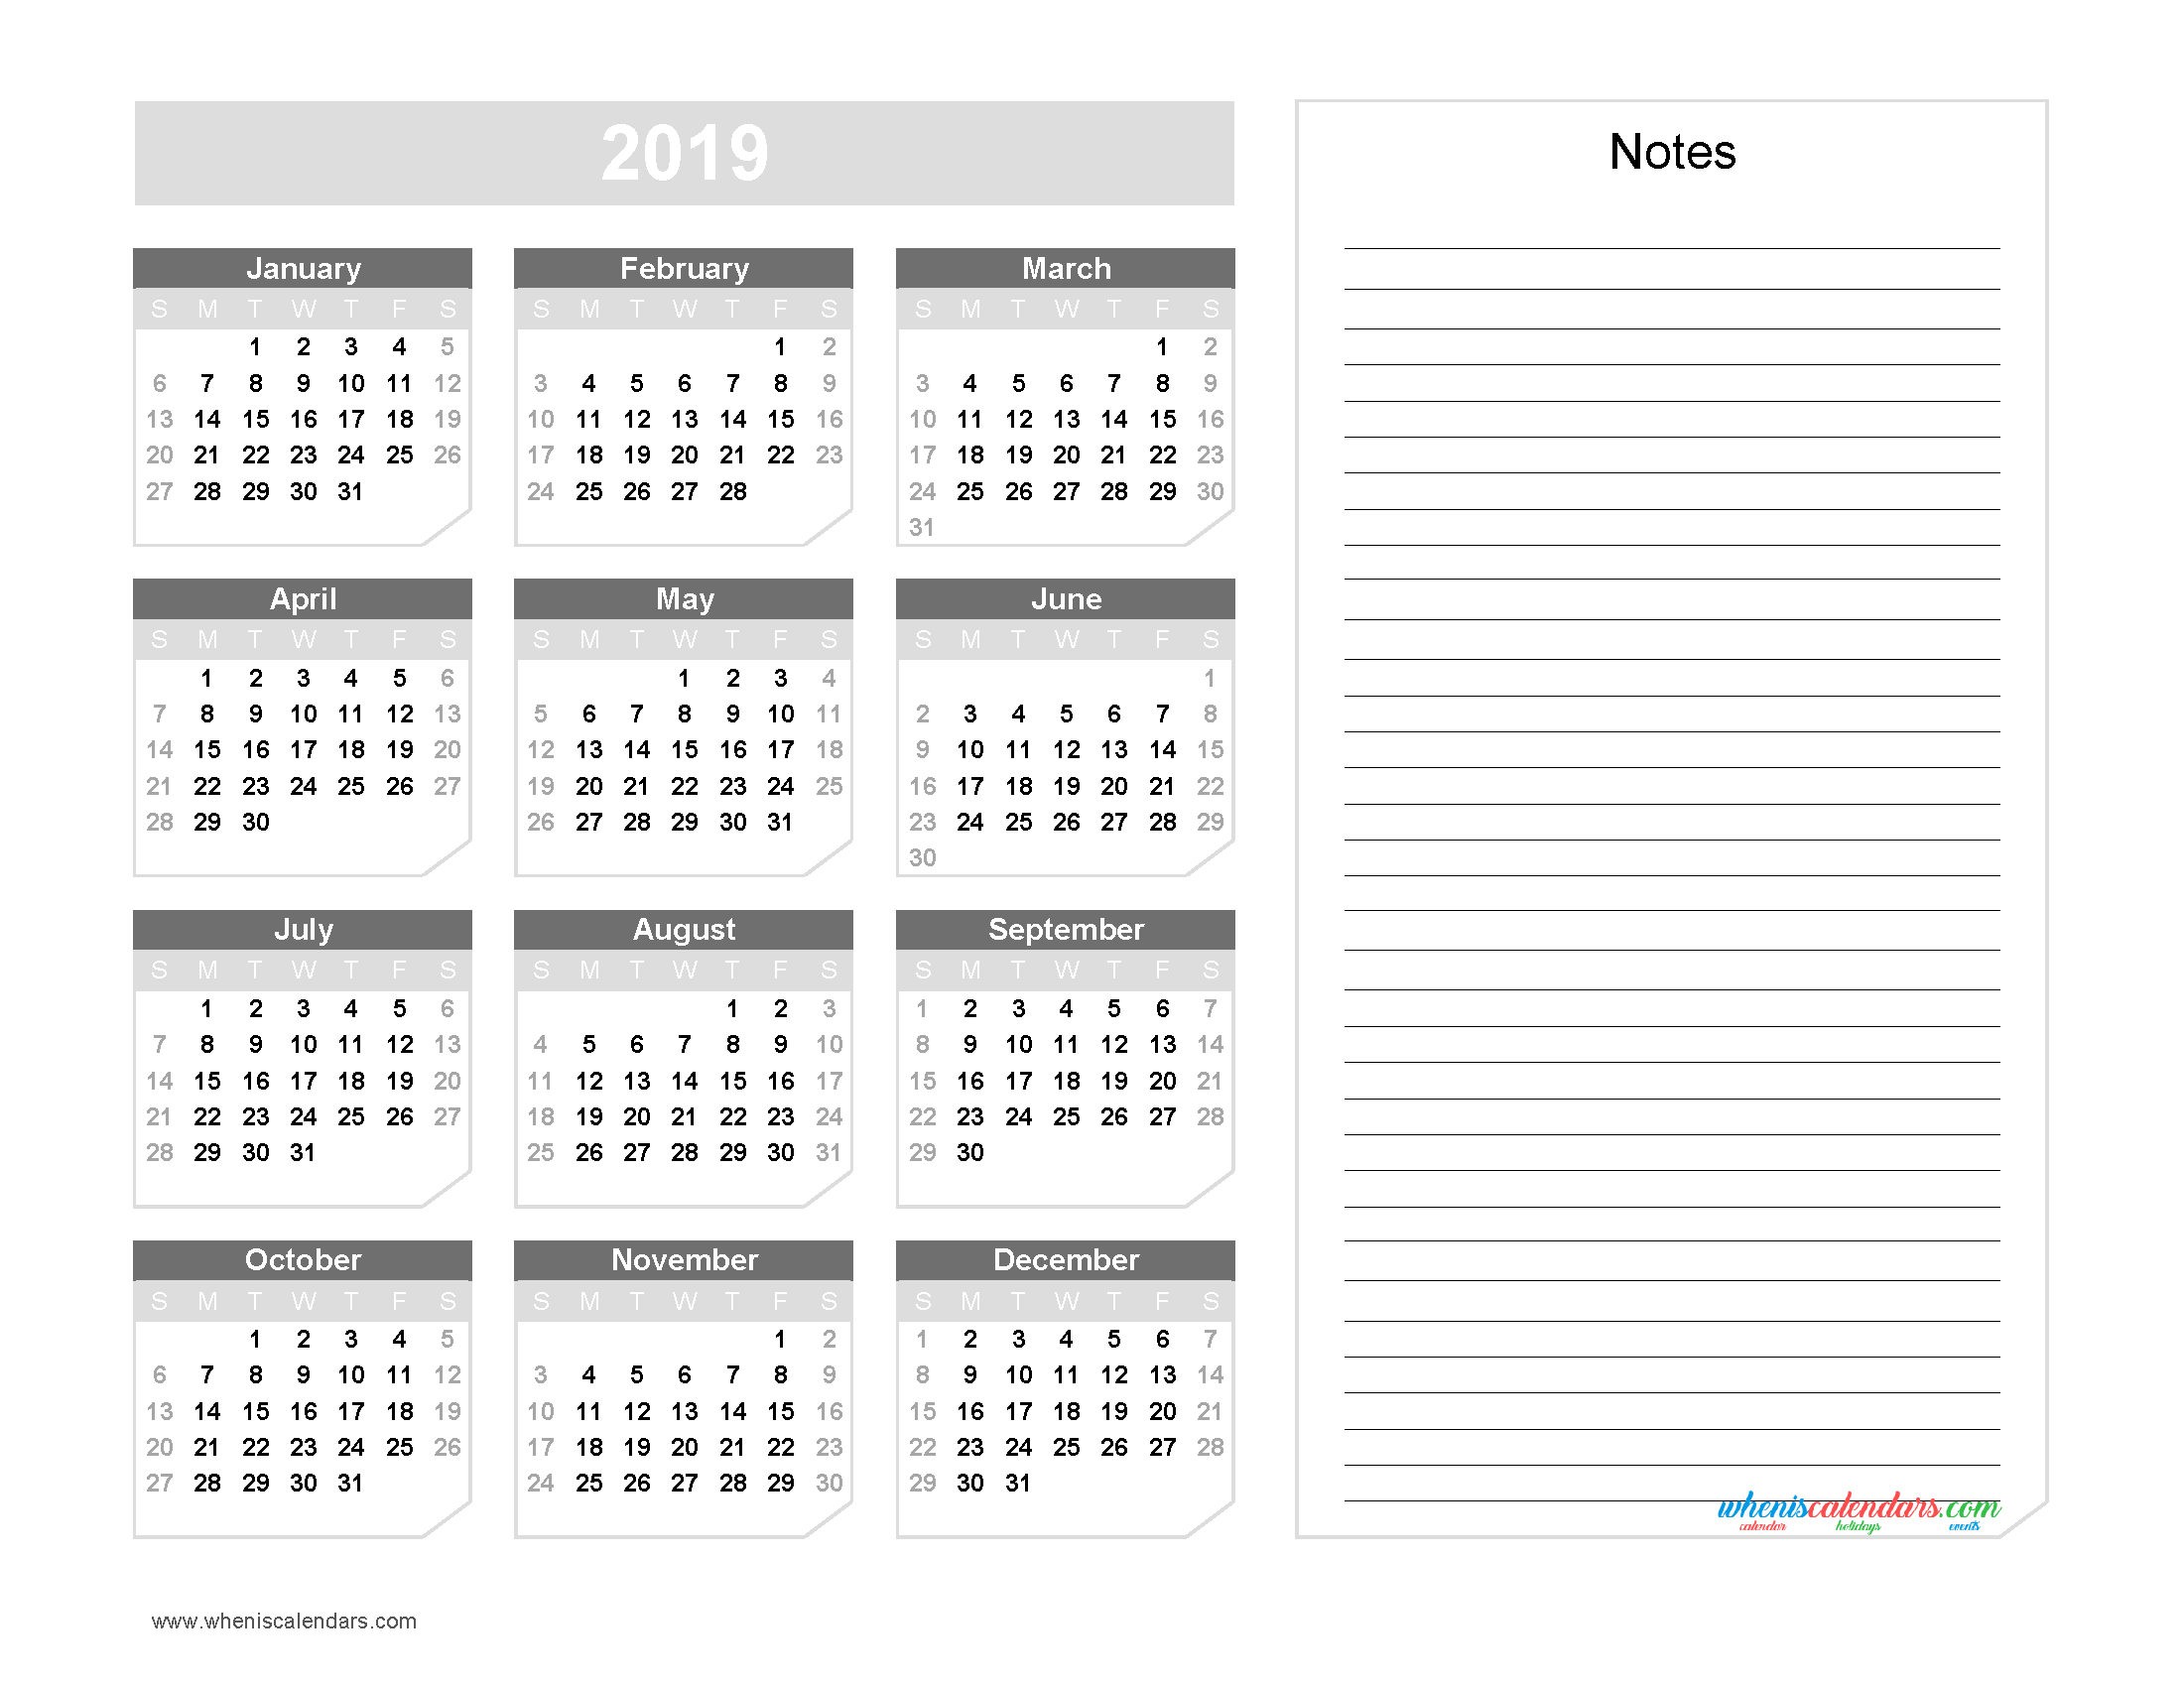 2019-yearly-calendar-with-notes-printable-chamfer-collection-grayscale